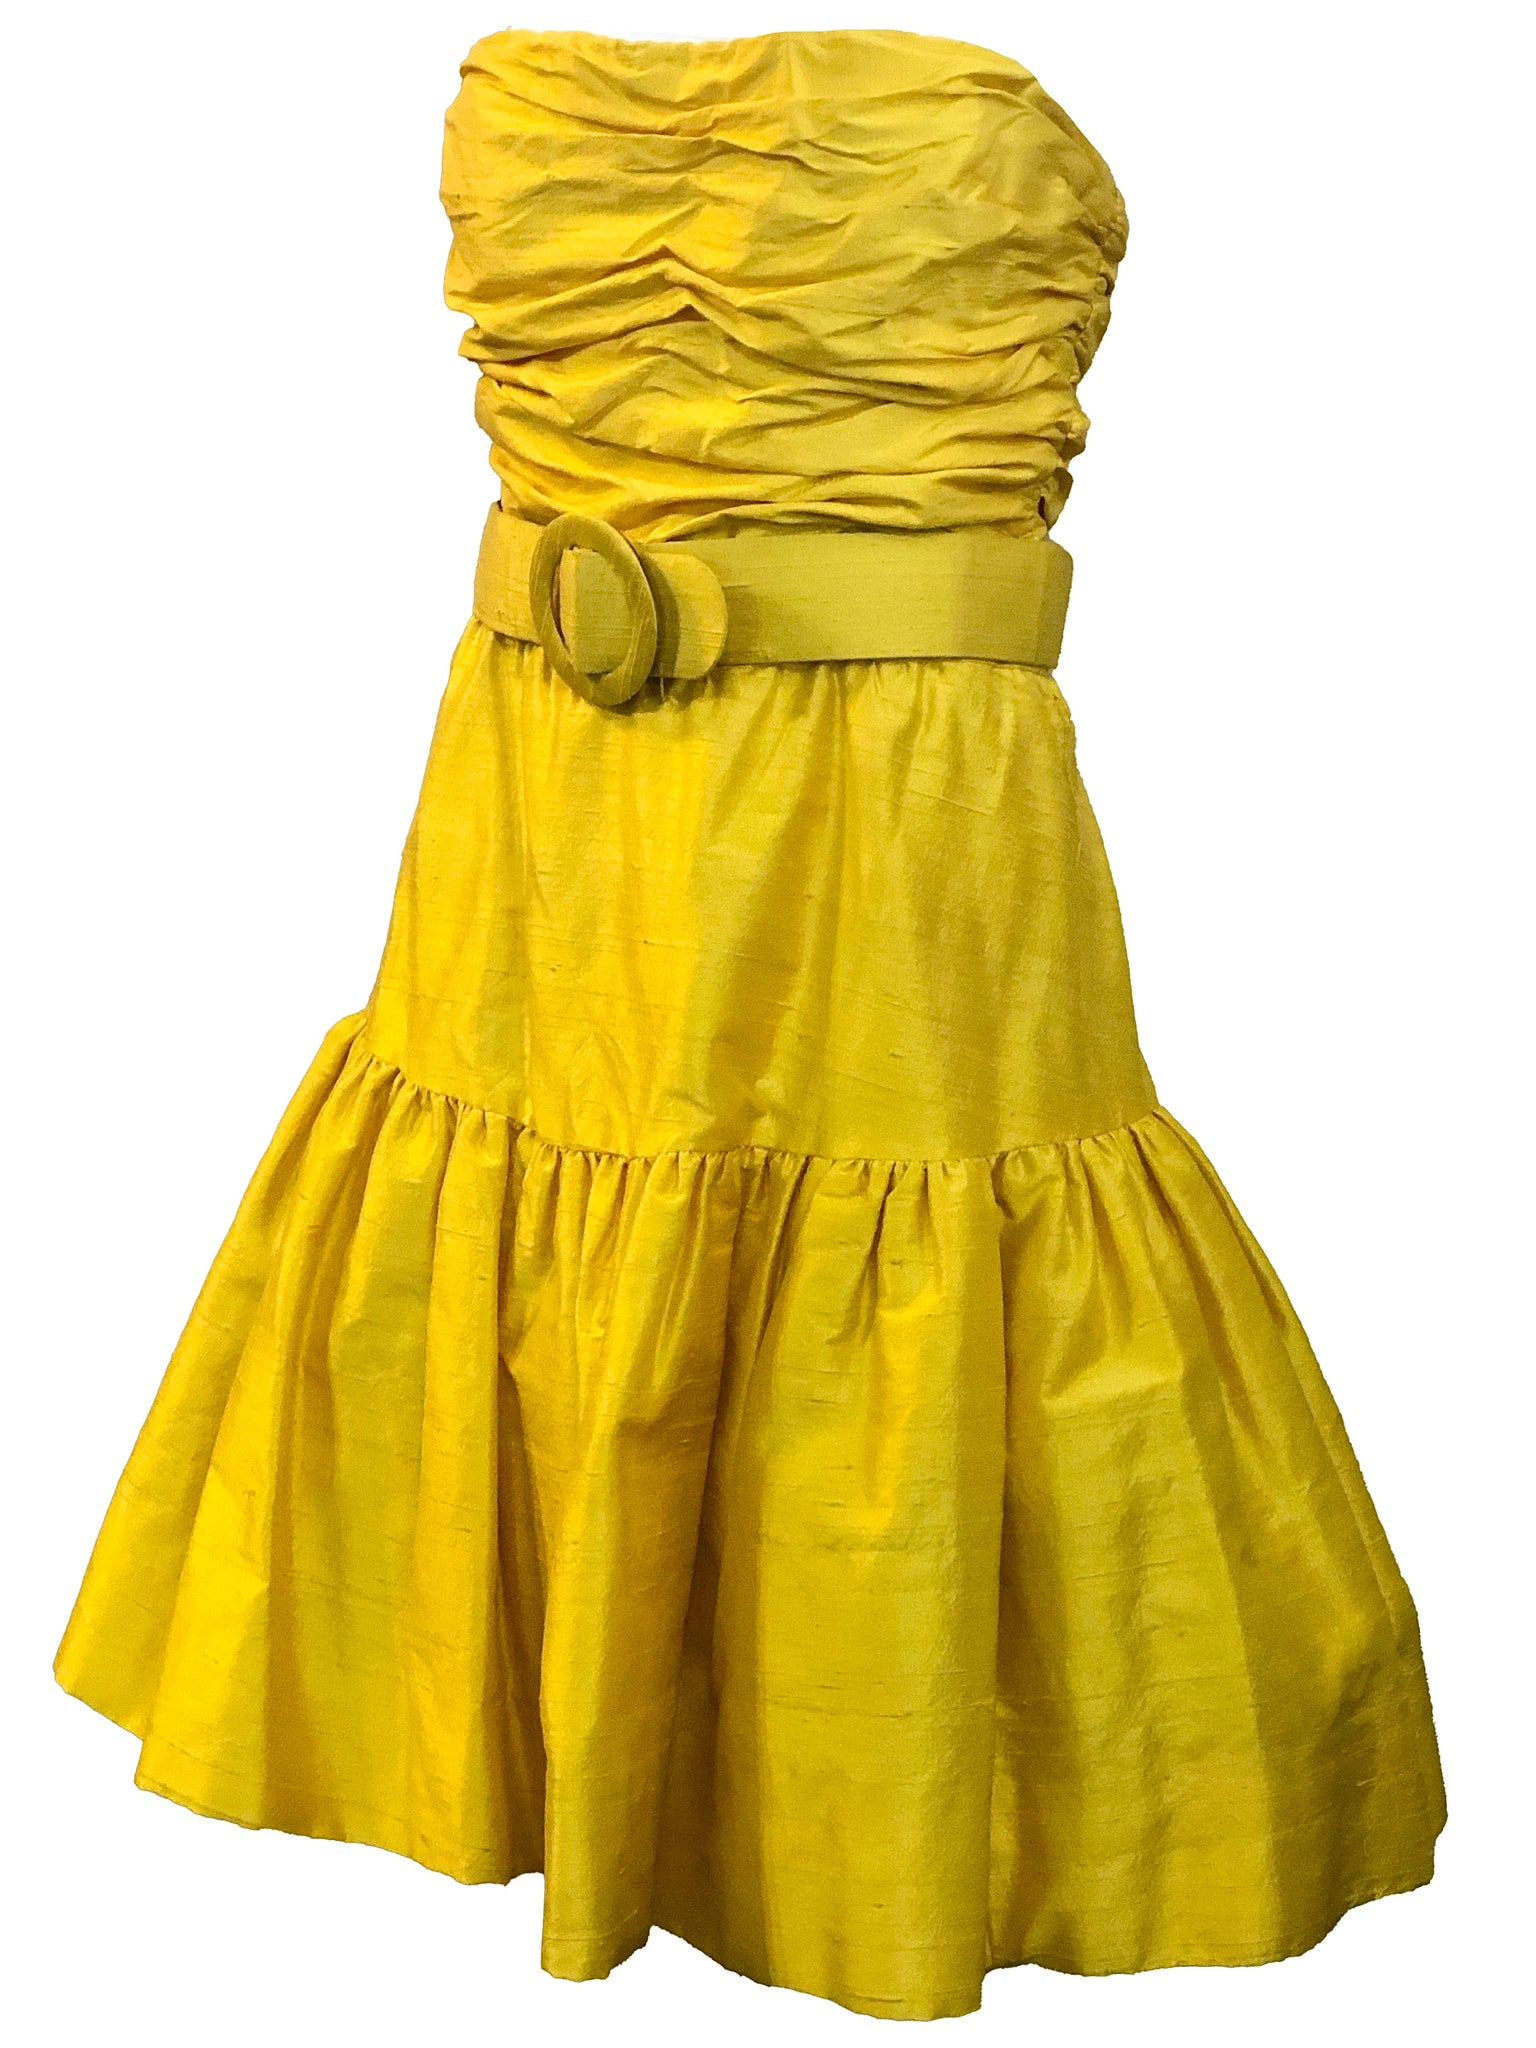 Arnold Scaasi 80s Yellow Raw Silk  Strapless Mini Dress with Belt ANGLE 2 of 4